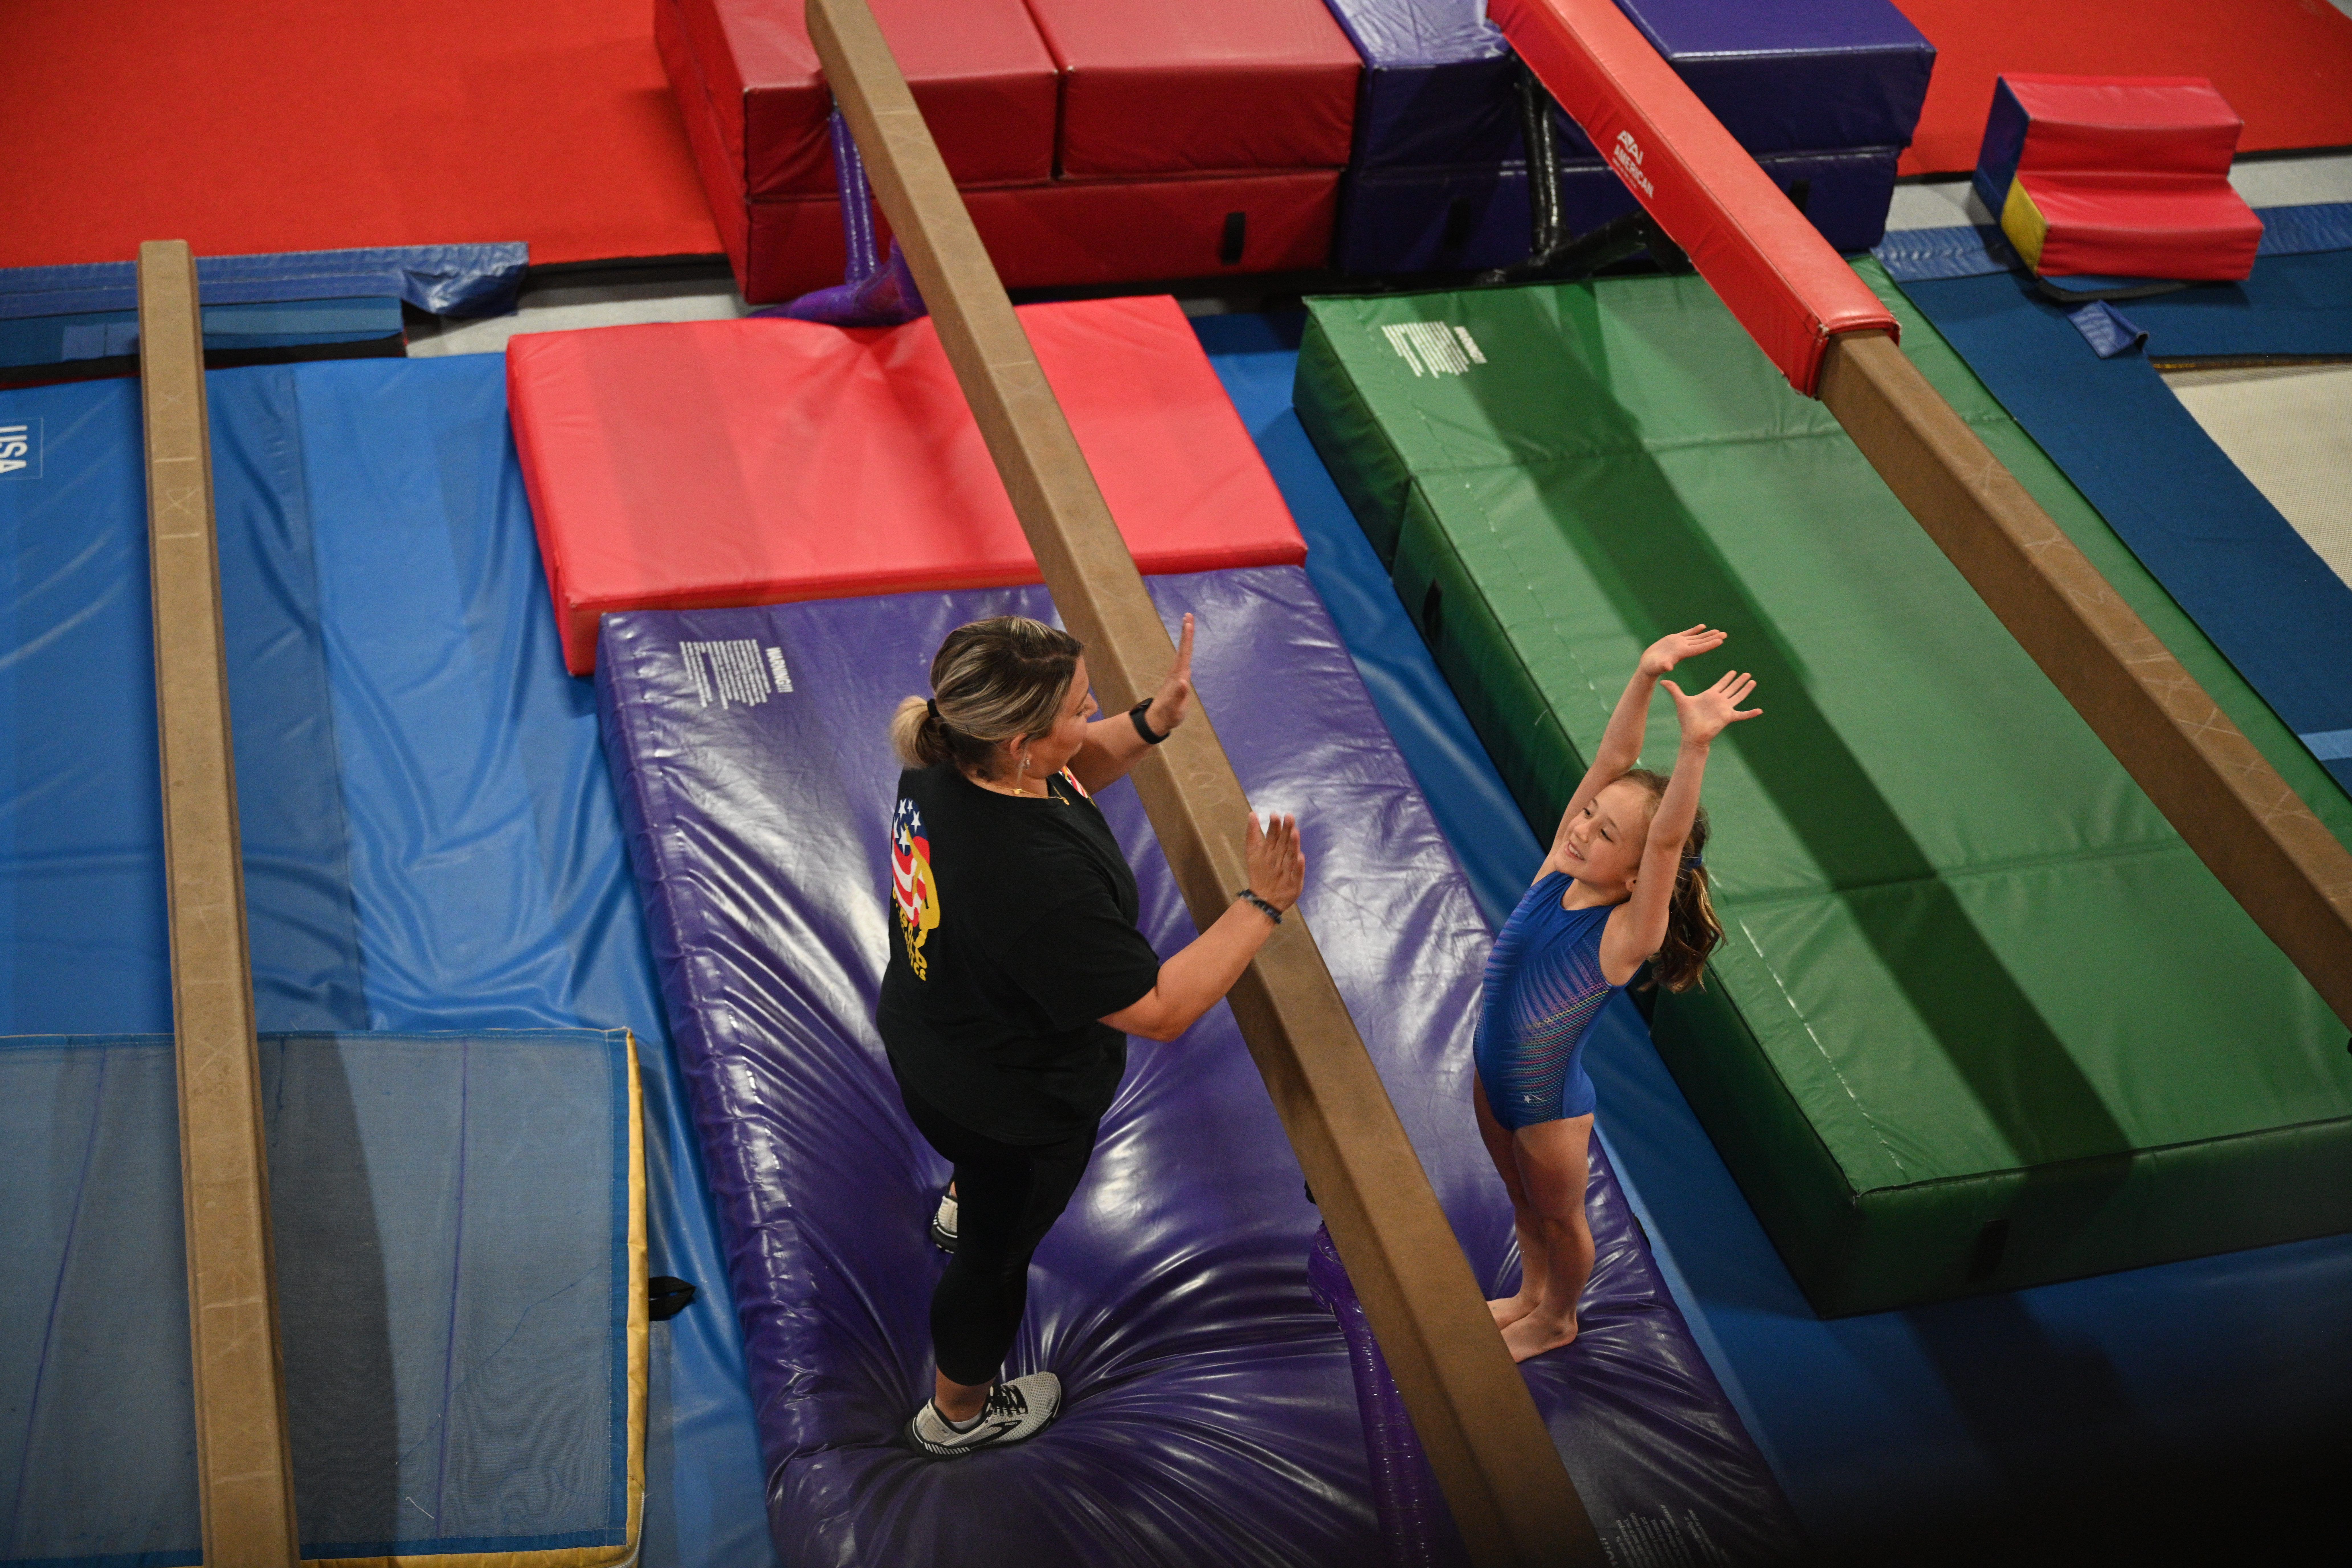 Gymnastics: A Fun and Healthy Alternative to Screen Time